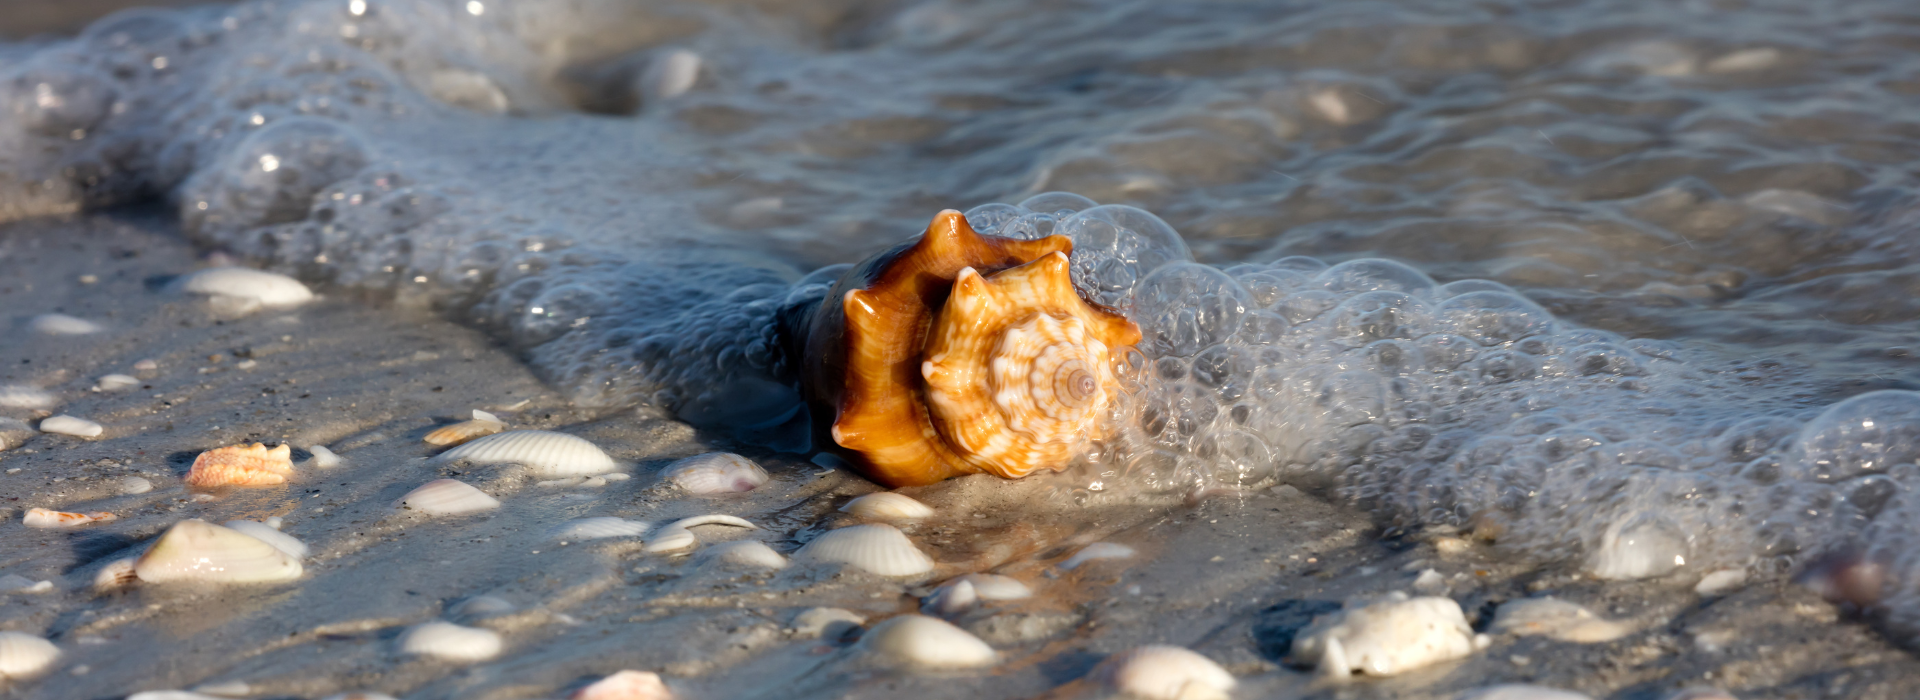 seashell in the surf